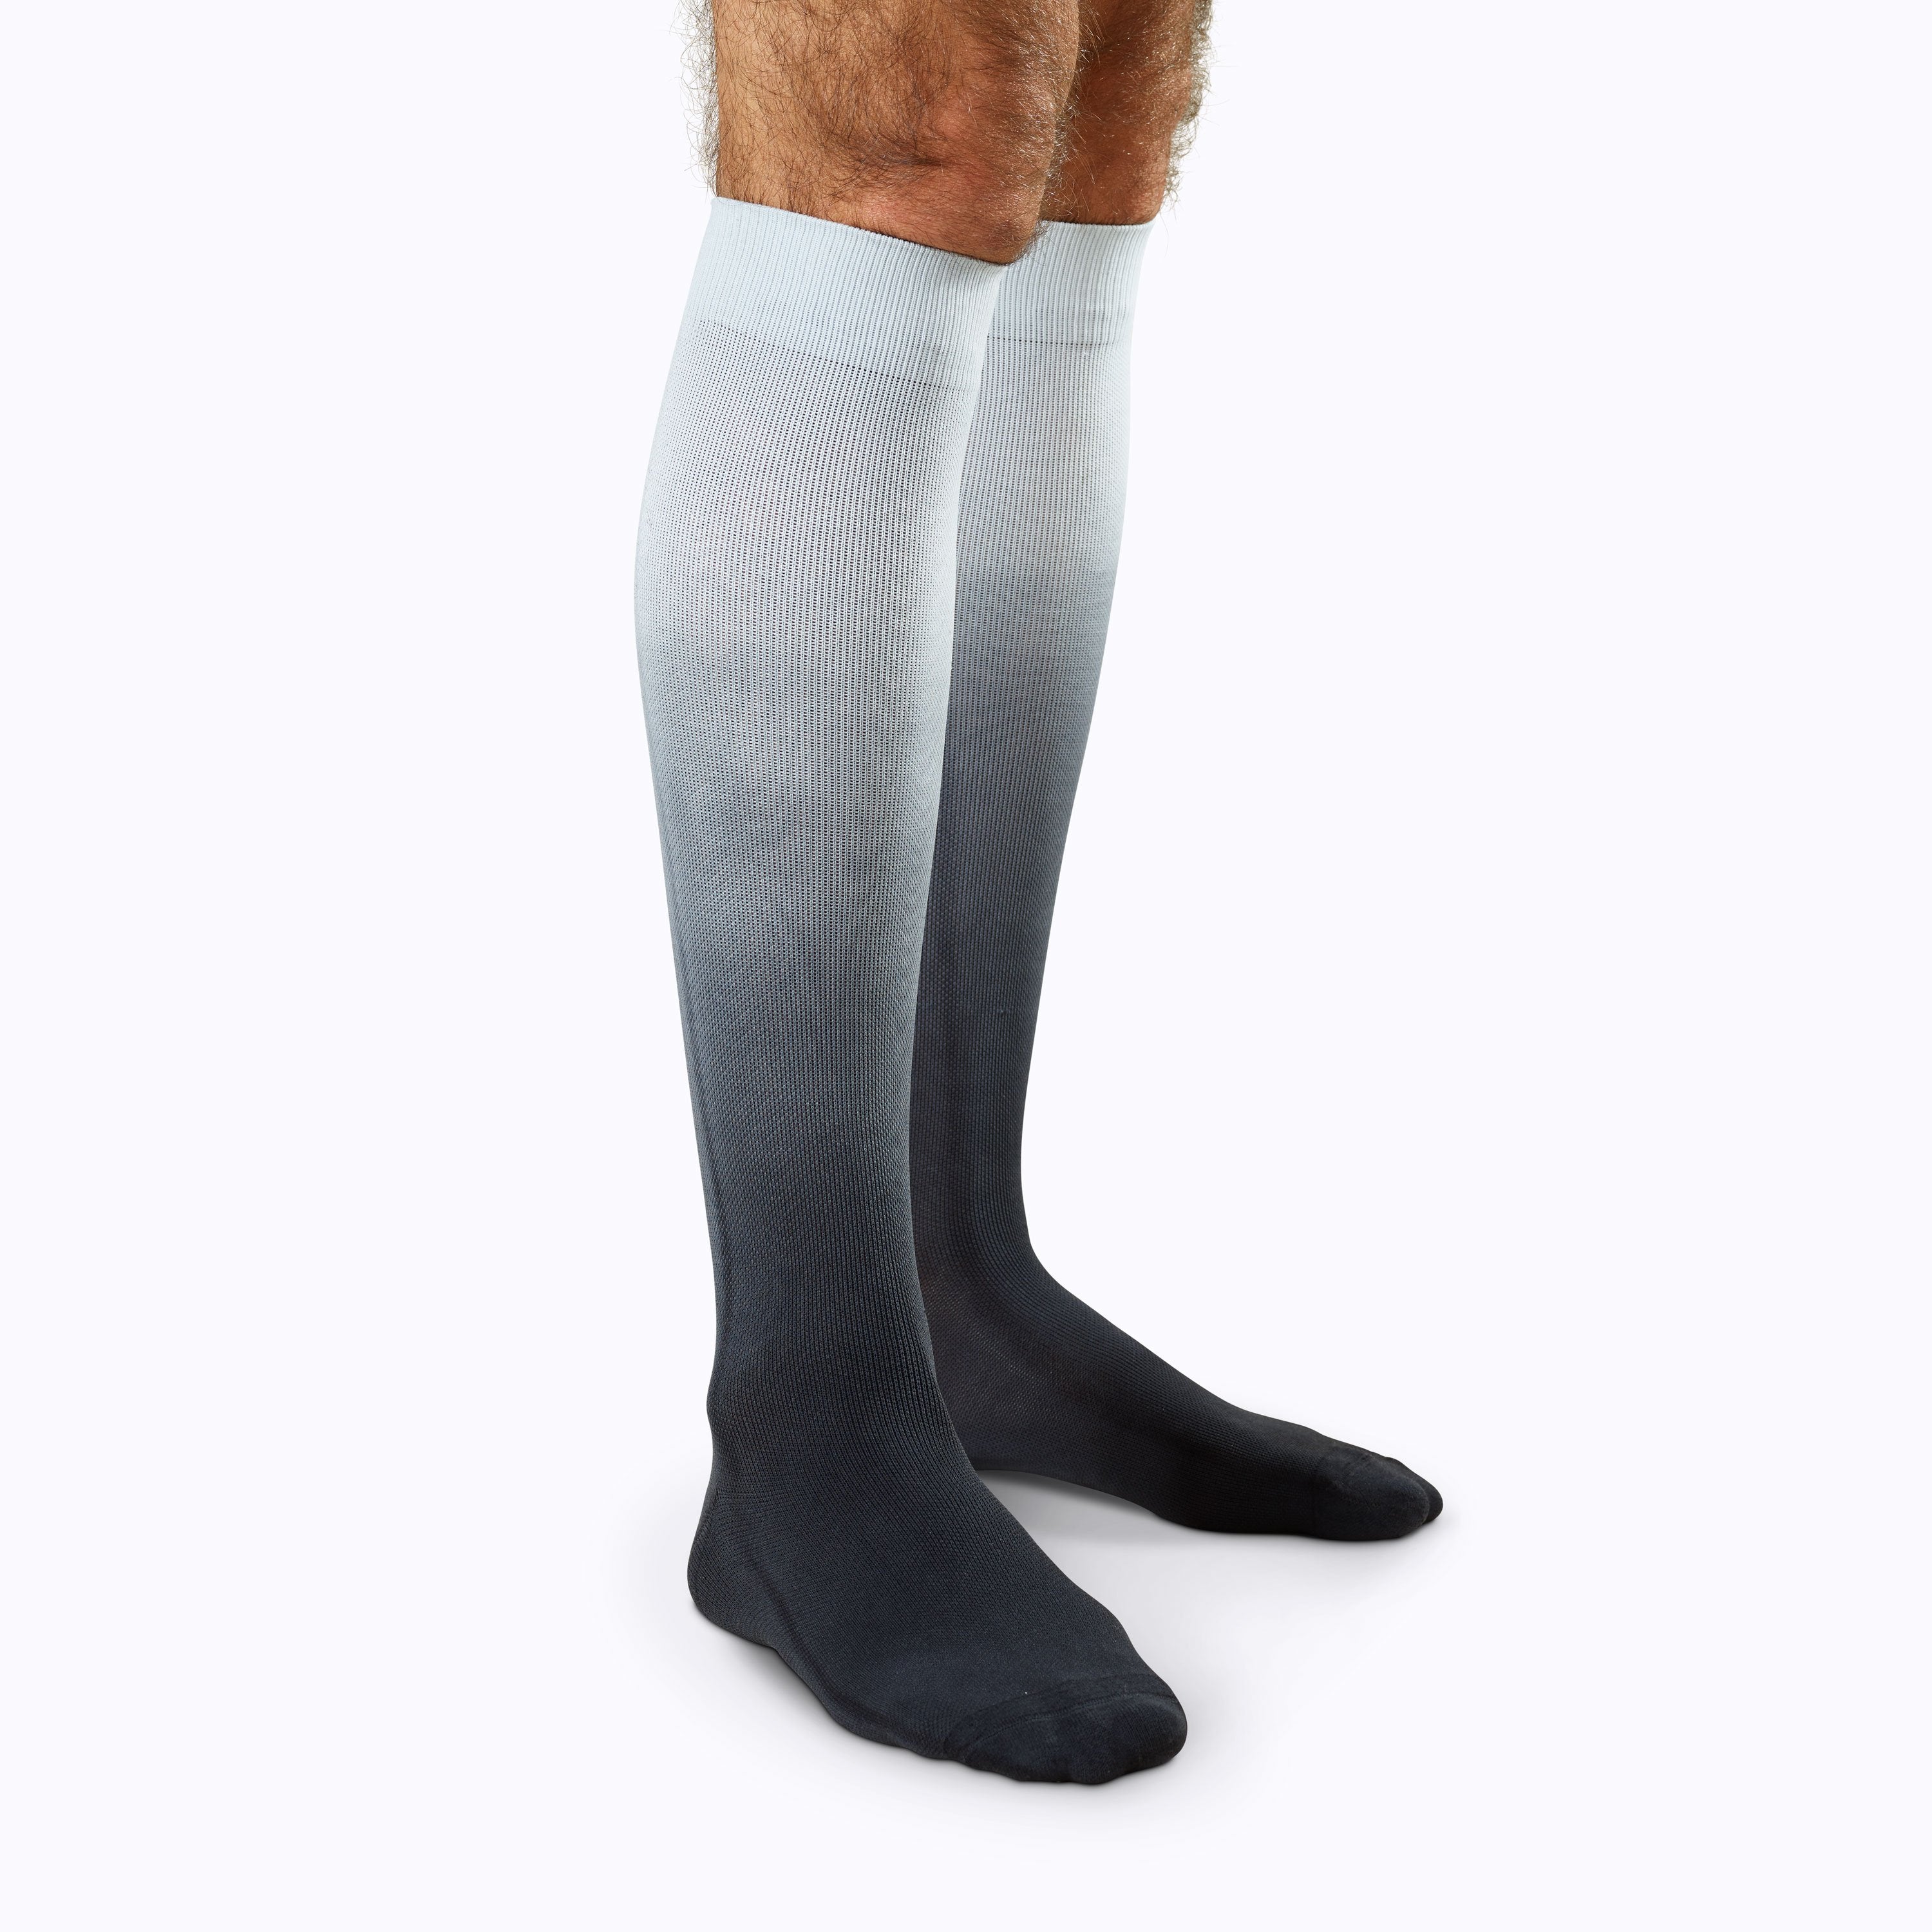 Men Compression Wear / Tights at Rs 250/piece